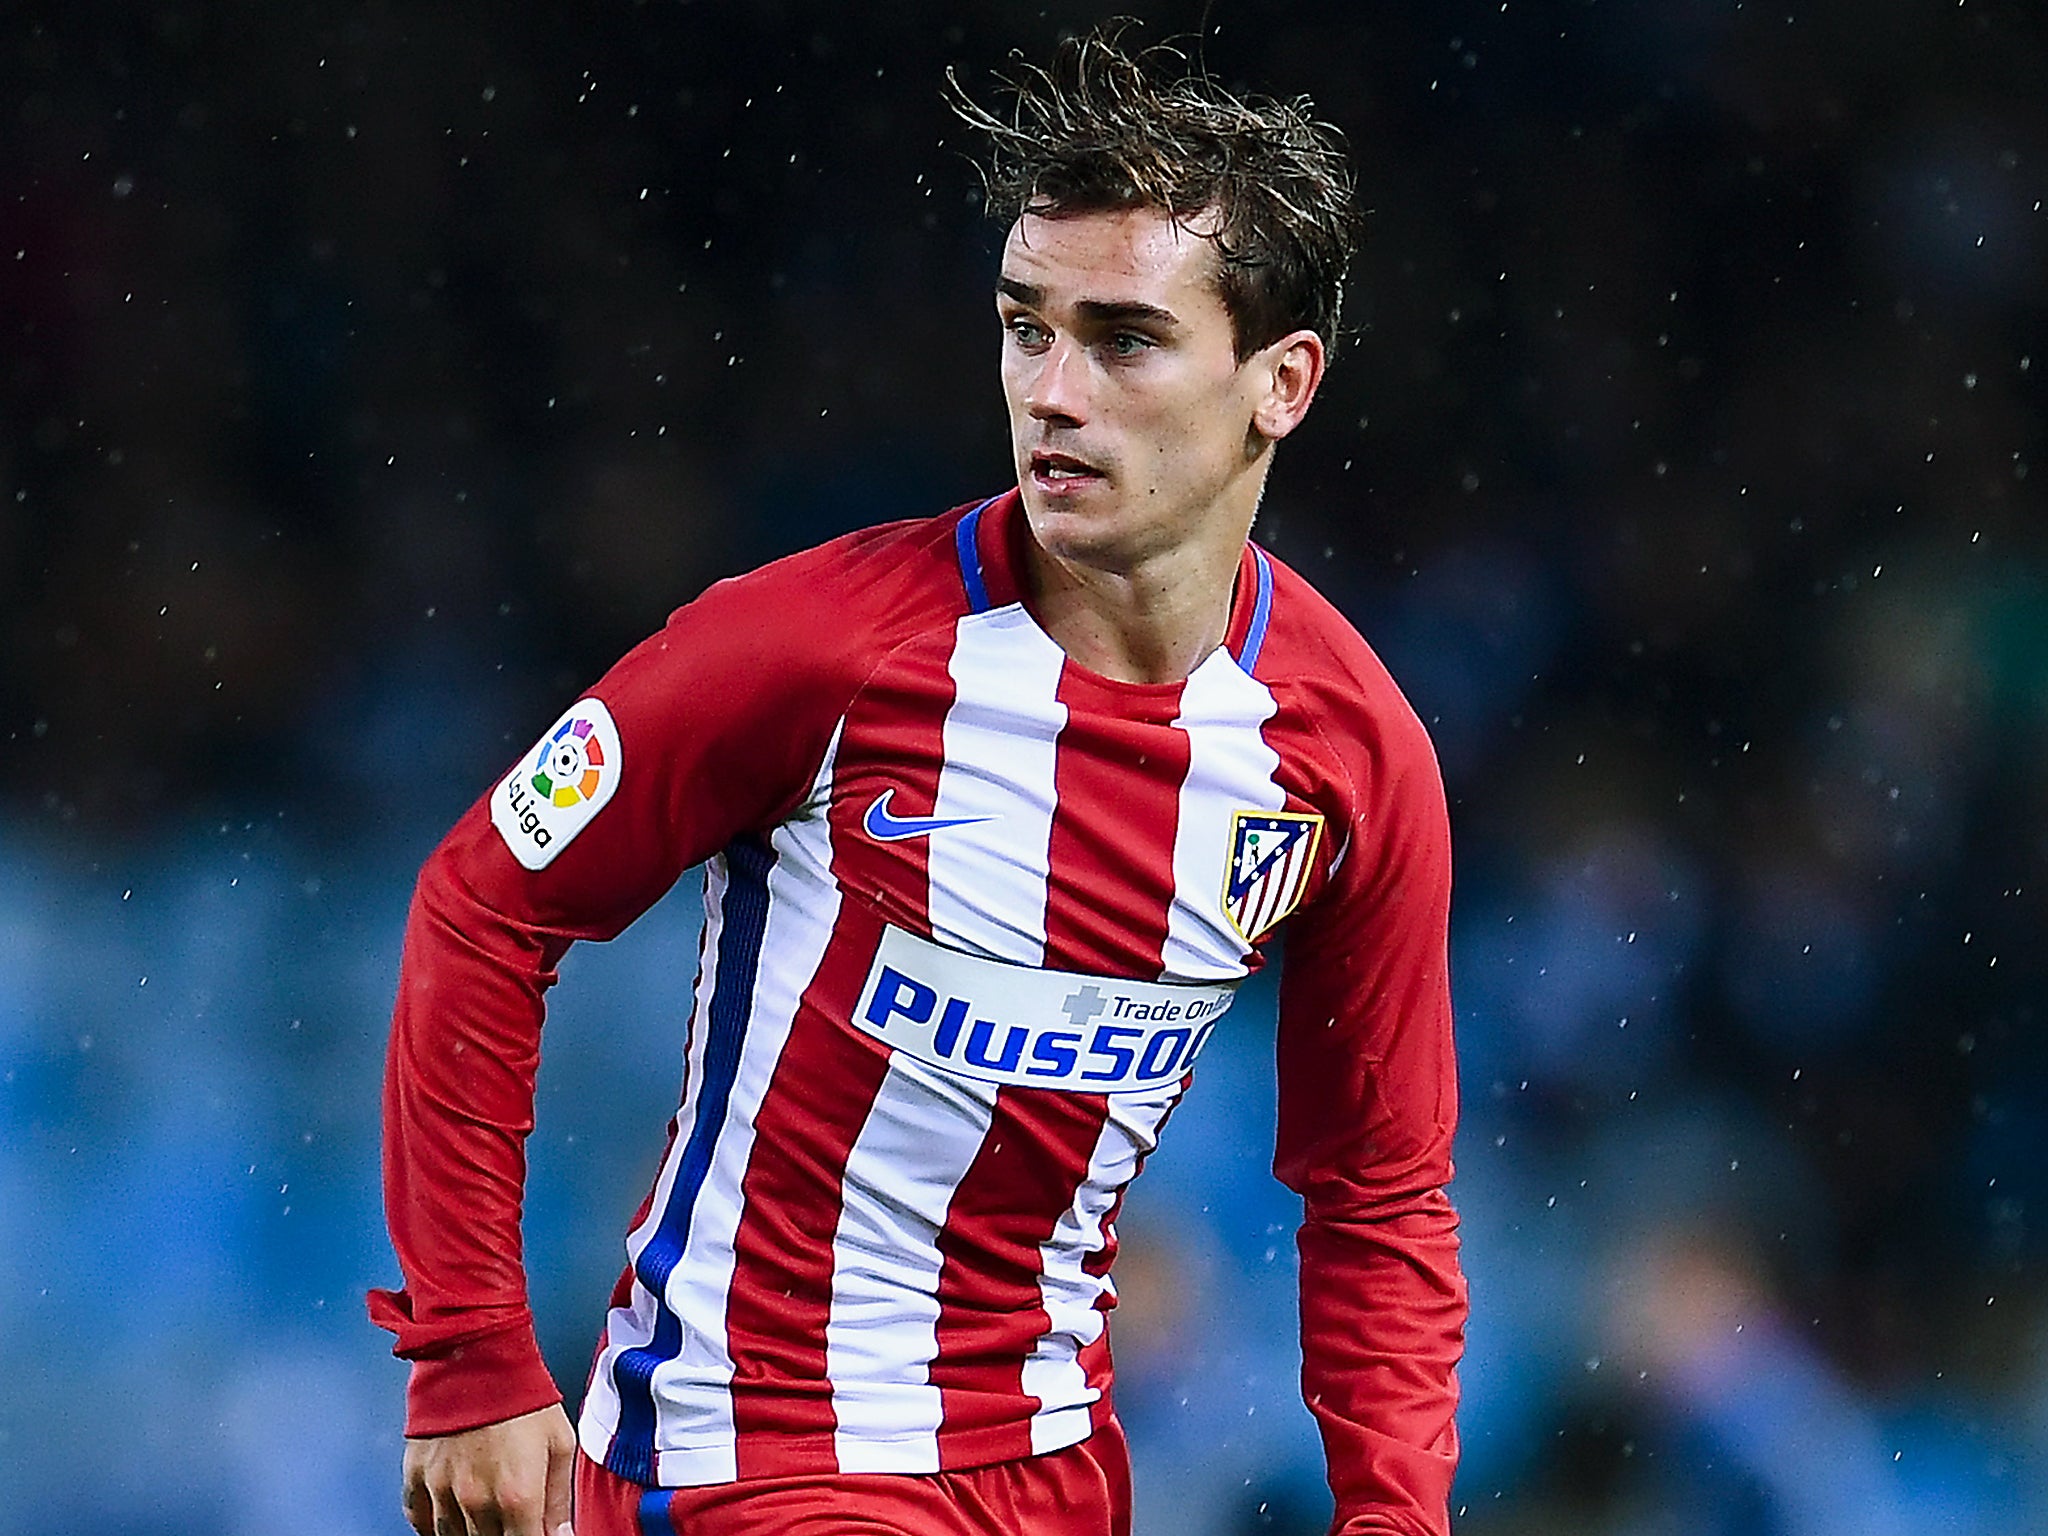 "Don't ask me about my future anymore" - Griezmann was unusually defensive